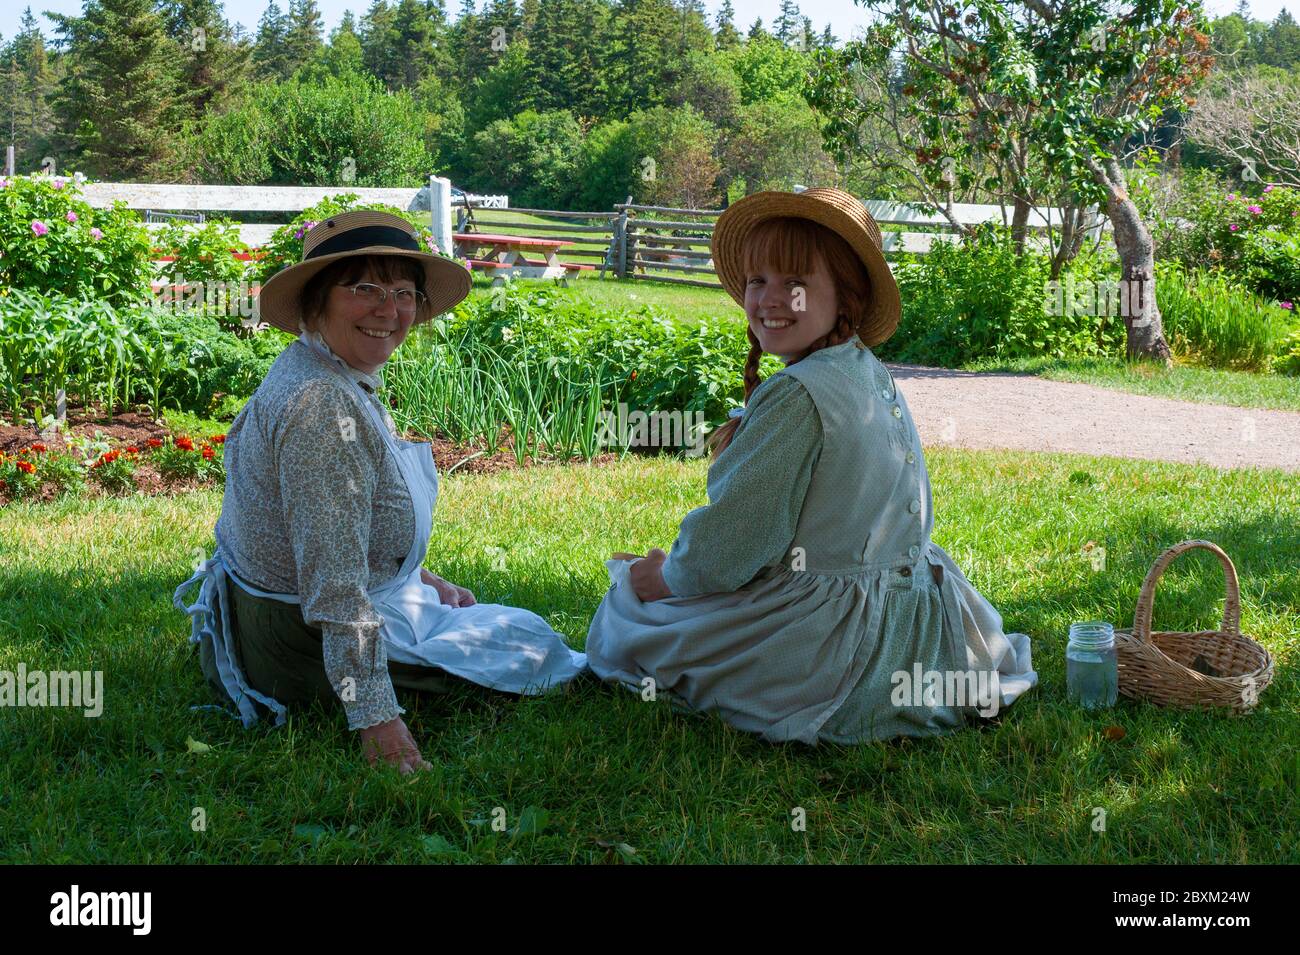 Actors in the characters of Anne Shirley (Anne of Green Gables) and Marilla Cuthbert. Green Gables Heritage Place, Cavendish, PEI, Canada Stock Photo